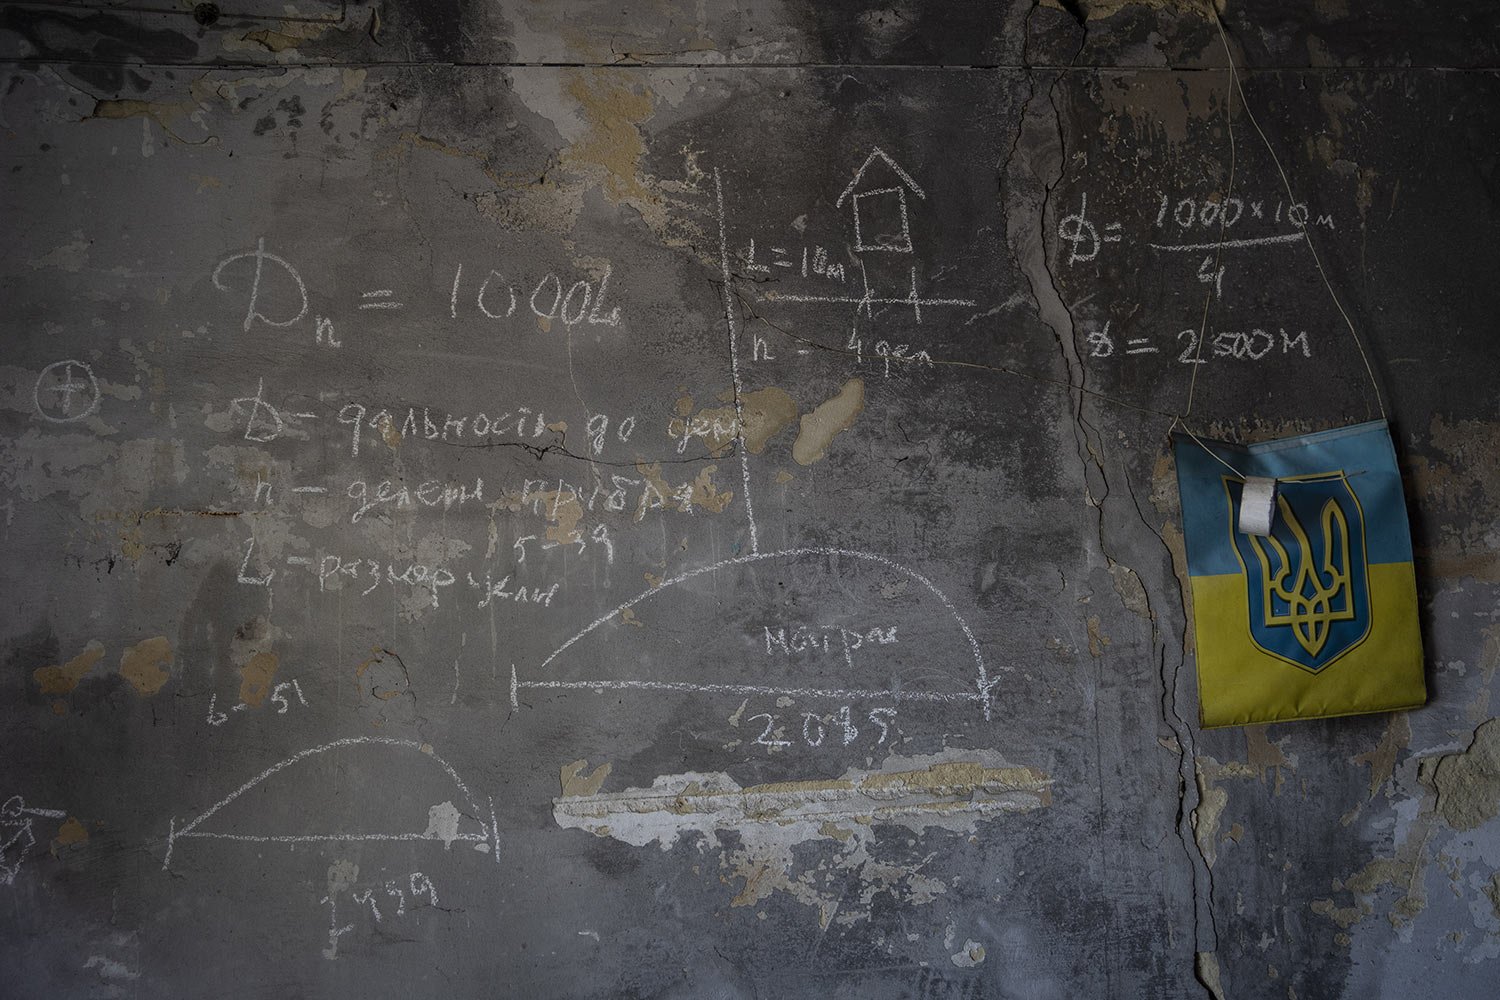  Artillery techniques are drawn on a wall inside a house near the frontline of the Russian invasion in the Donetsk oblast region of eastern Ukraine, Thursday, June 2, 2022. (AP Photo/Bernat Armangue) 